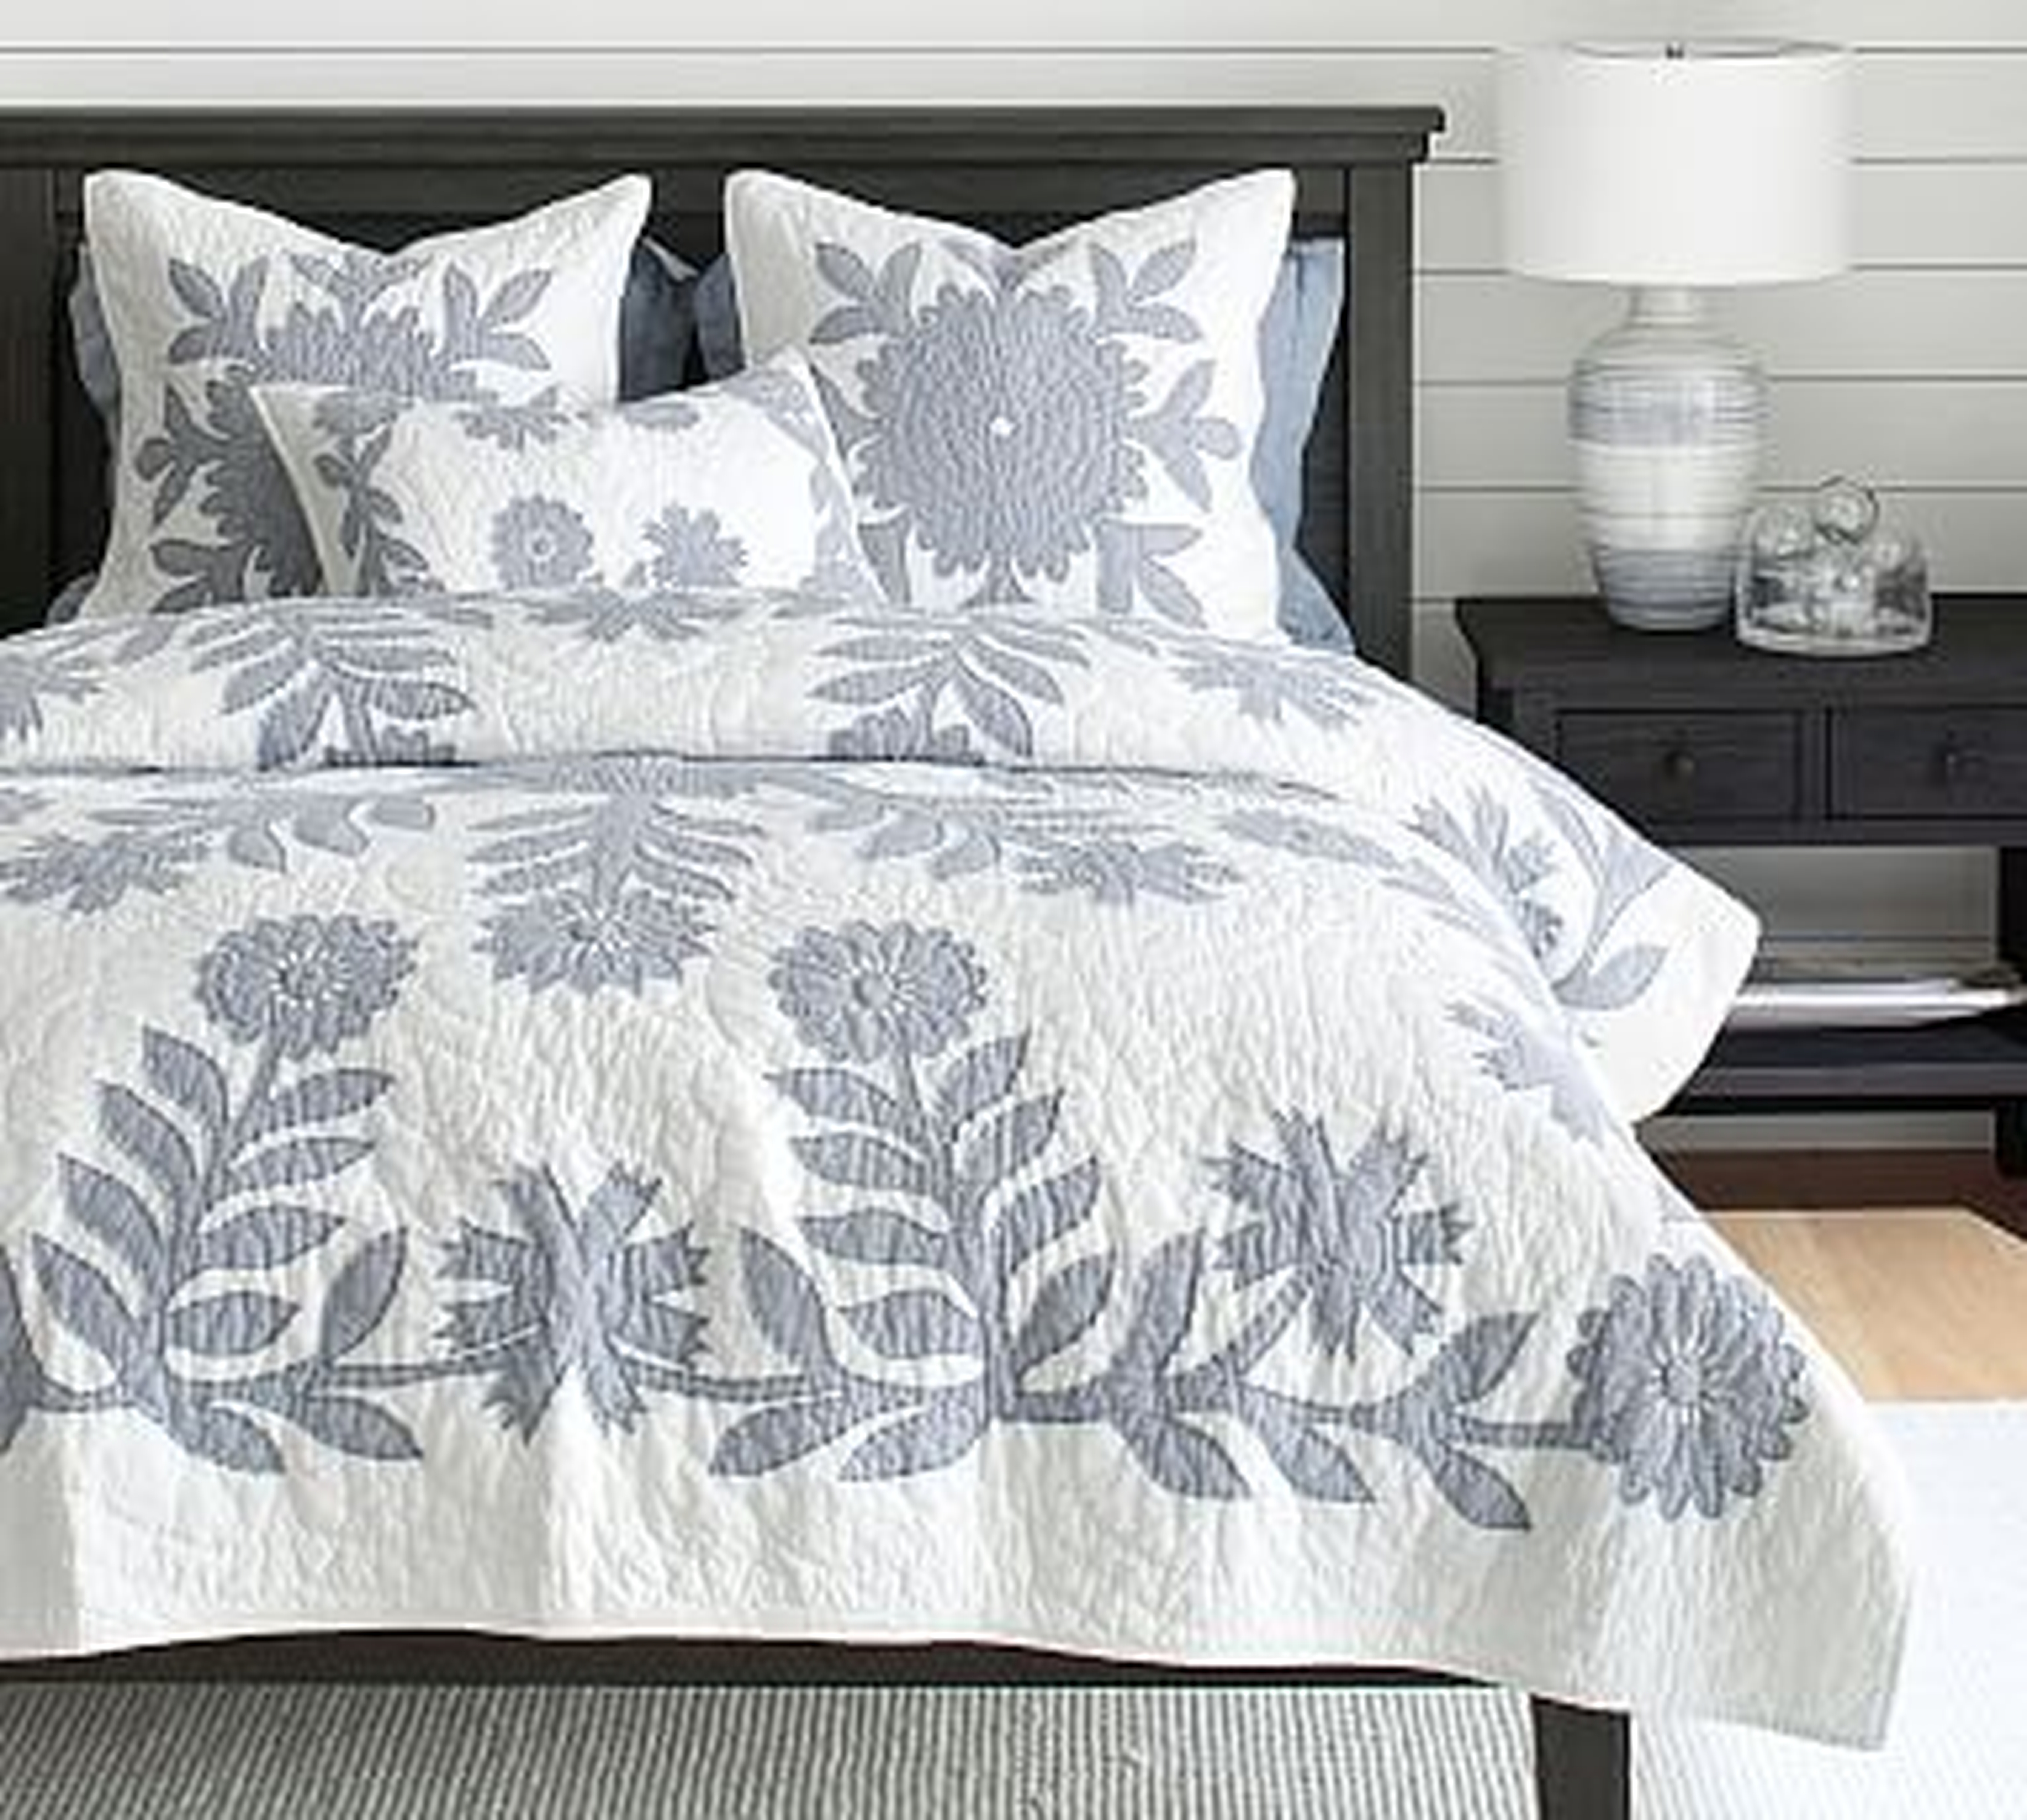 Lilo Cotton Handcrafted Applique Quilt, Full/Queen, Chambray - Pottery Barn